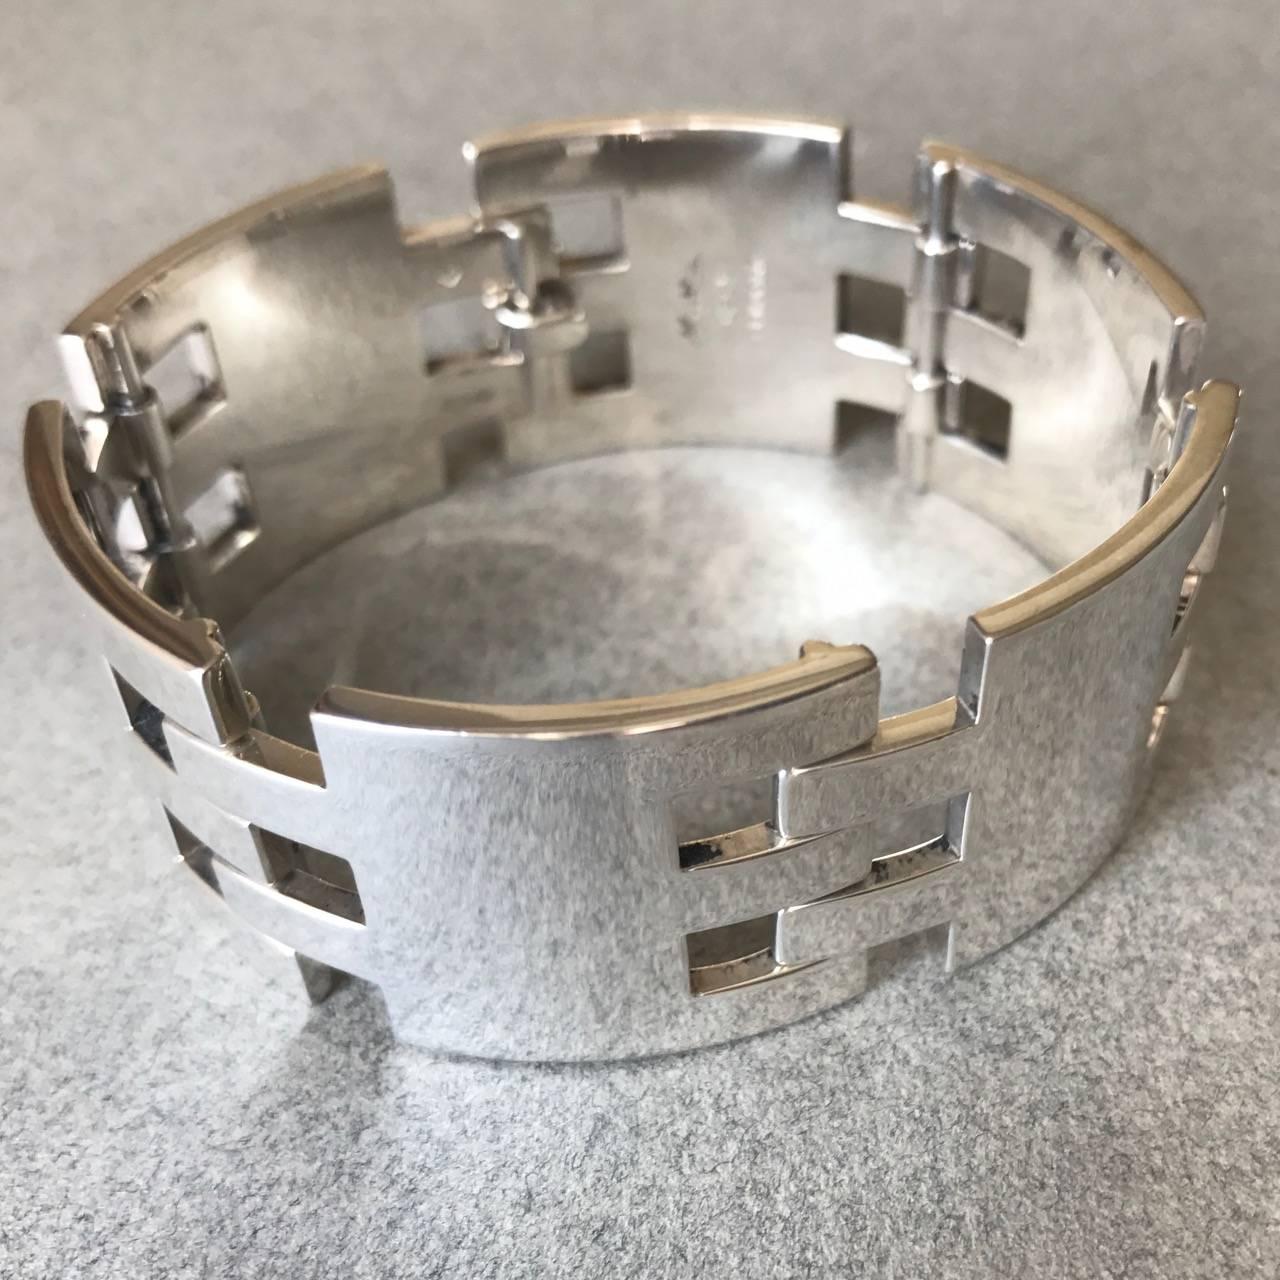 Hans Hansen Sterling Silver Modernist Bracelet, Very Rare.

Bold, modernist, design with extremely heavy gauge sterling silver, ingenious screw clasp.

A must have for a serious collector. 

Complimentary gift box and FREE shipping included.

About